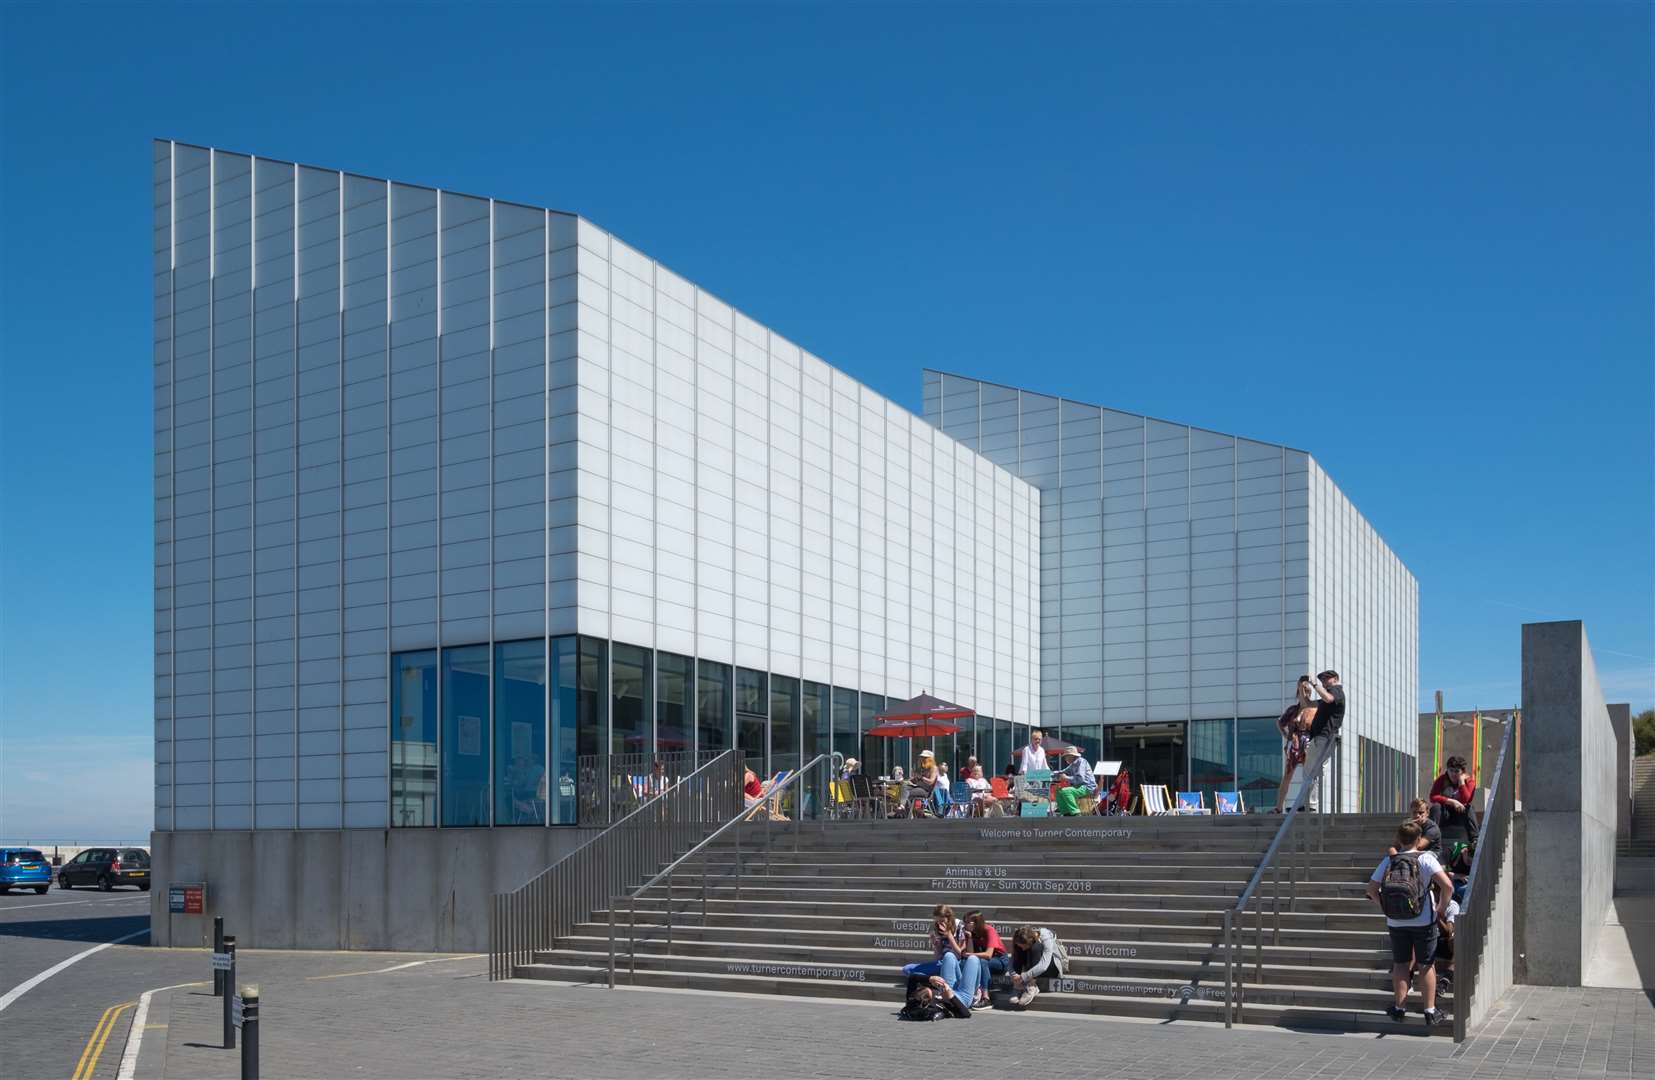 Admire creative art displays at the Turner Contemporary gallery